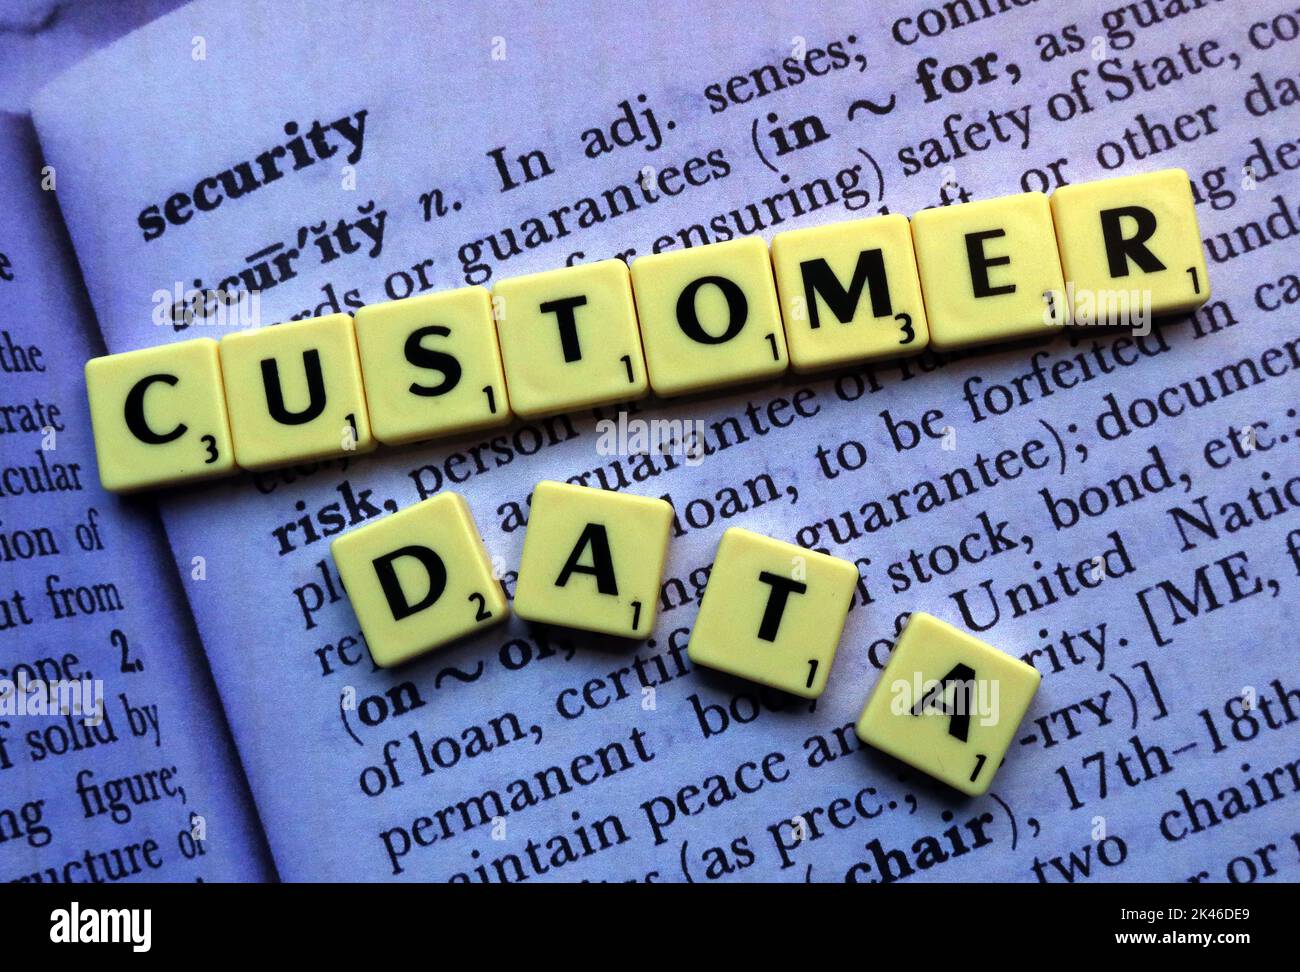 Customer Data,spelled out in Scrabble letters, on the dictionary definition of security Stock Photo